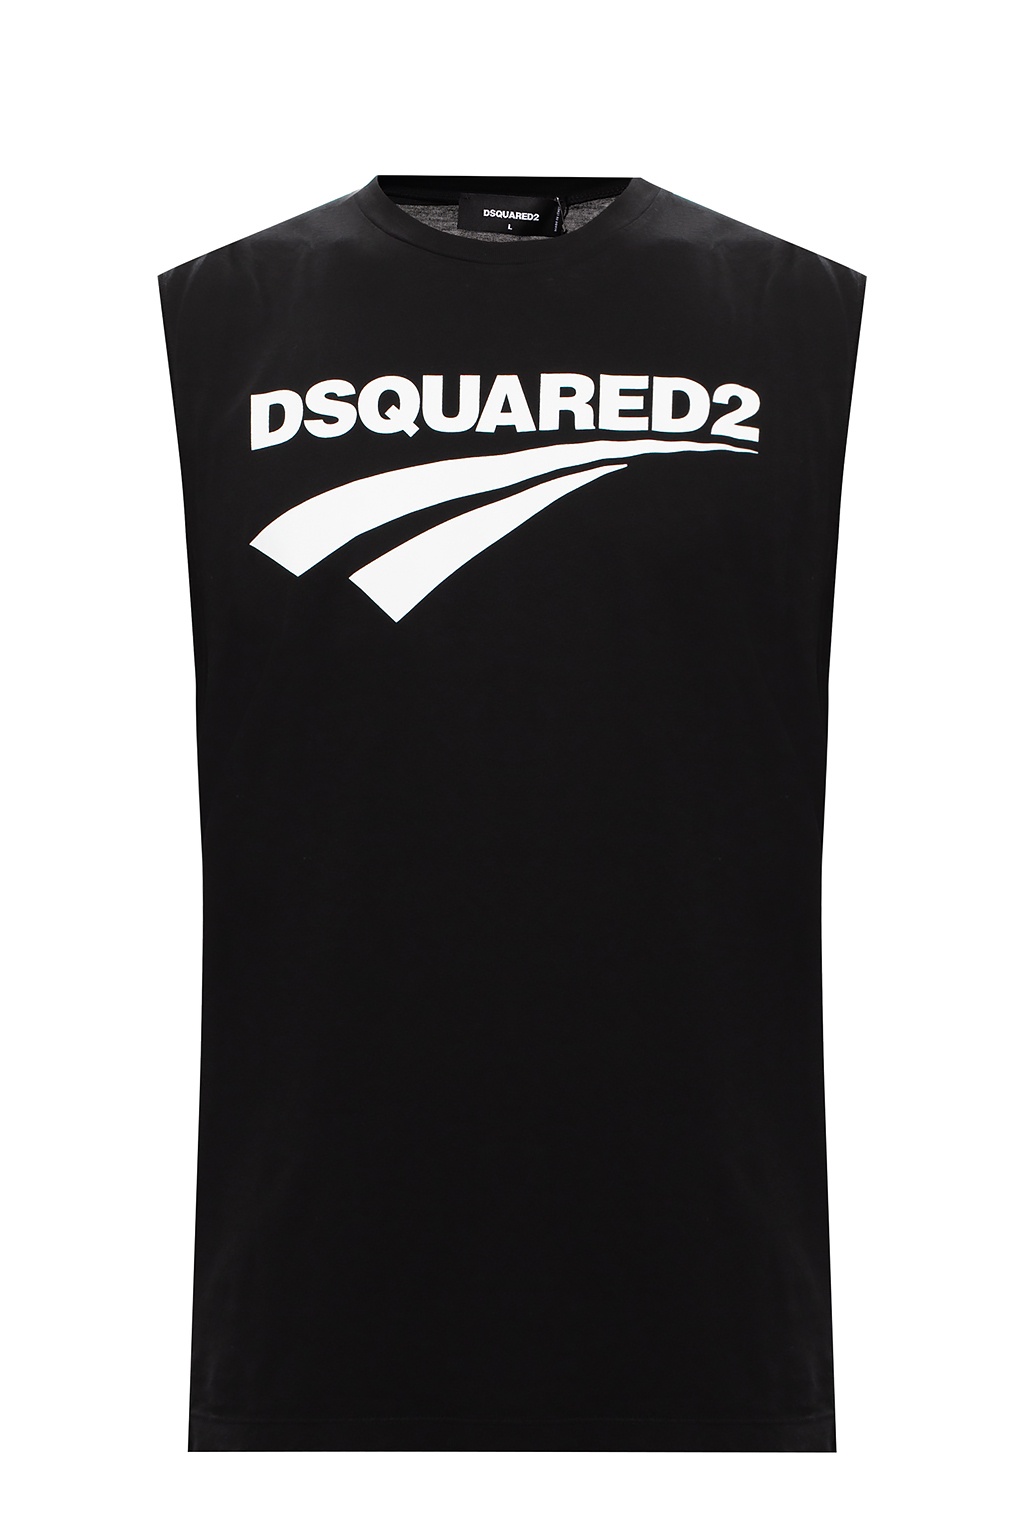 dsquared2 top